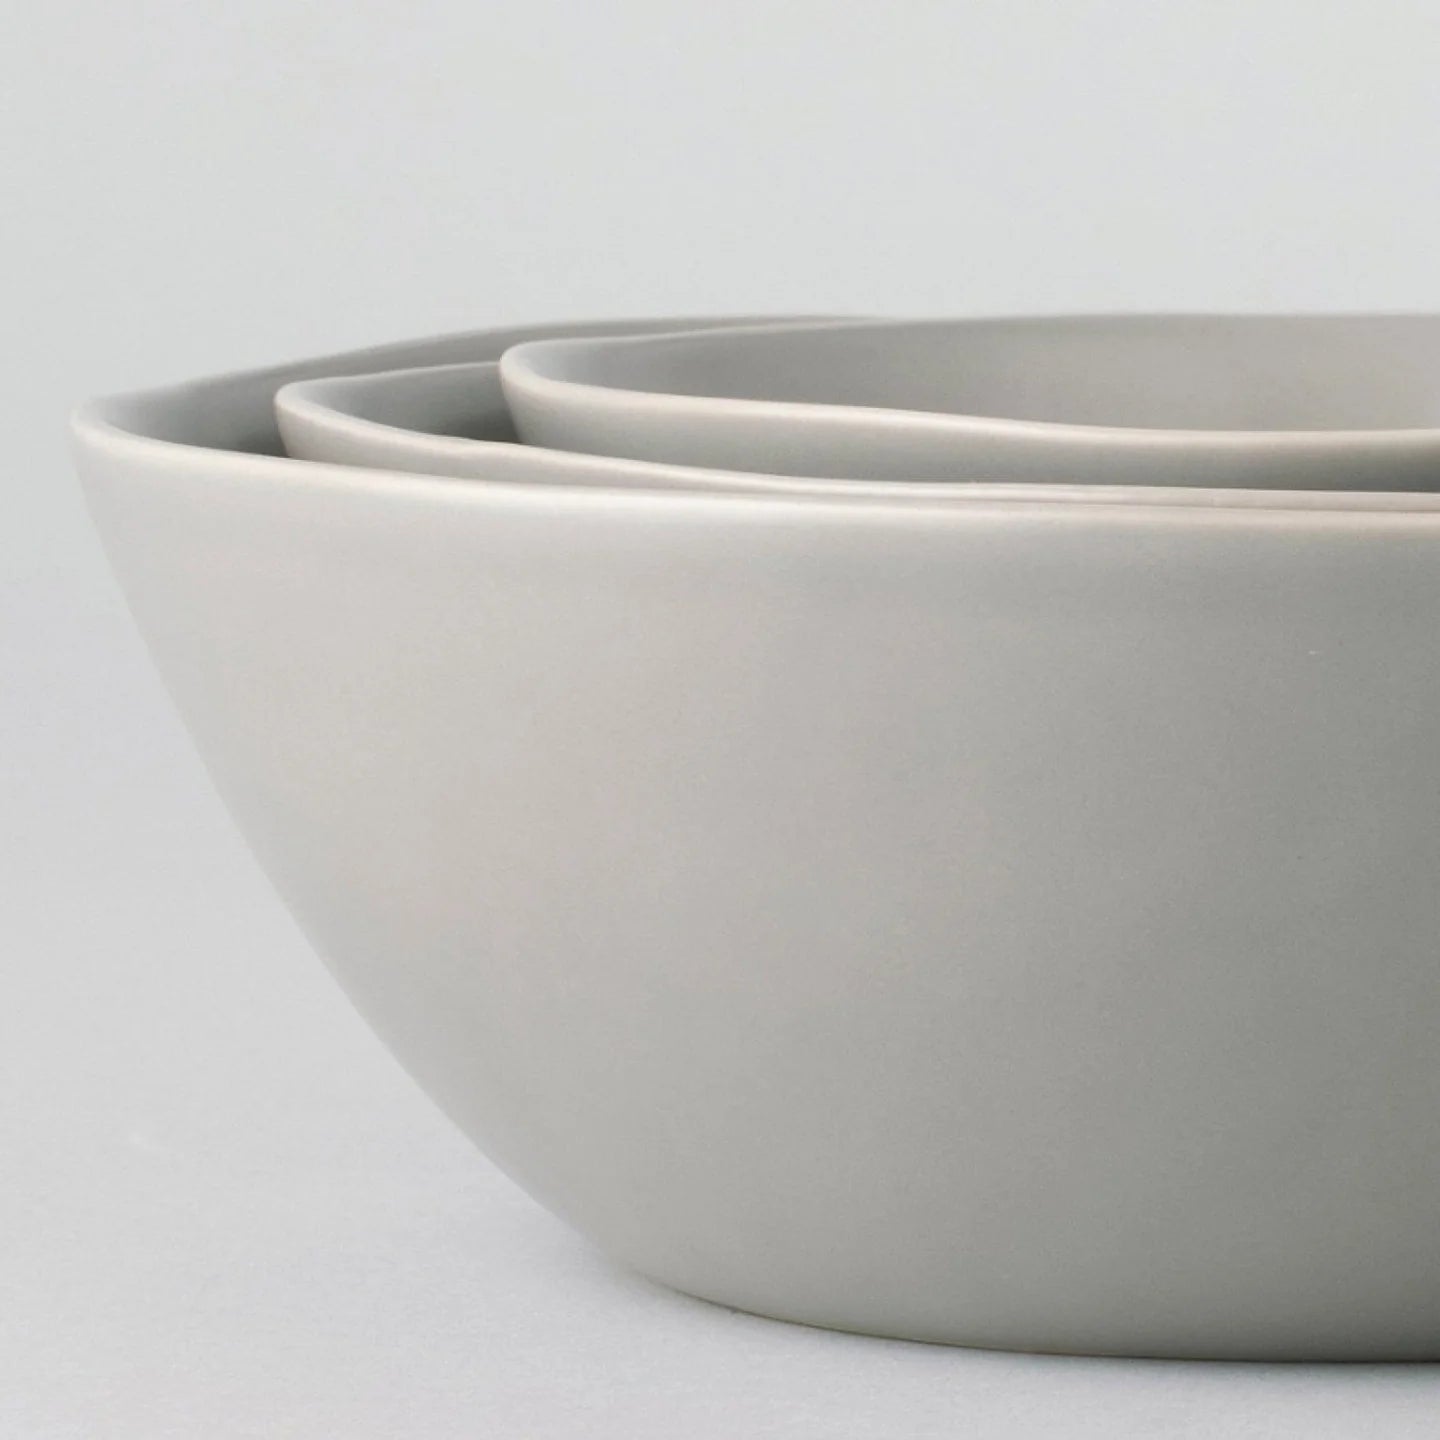 Fable Nested Serving Bowls - Dove Gray